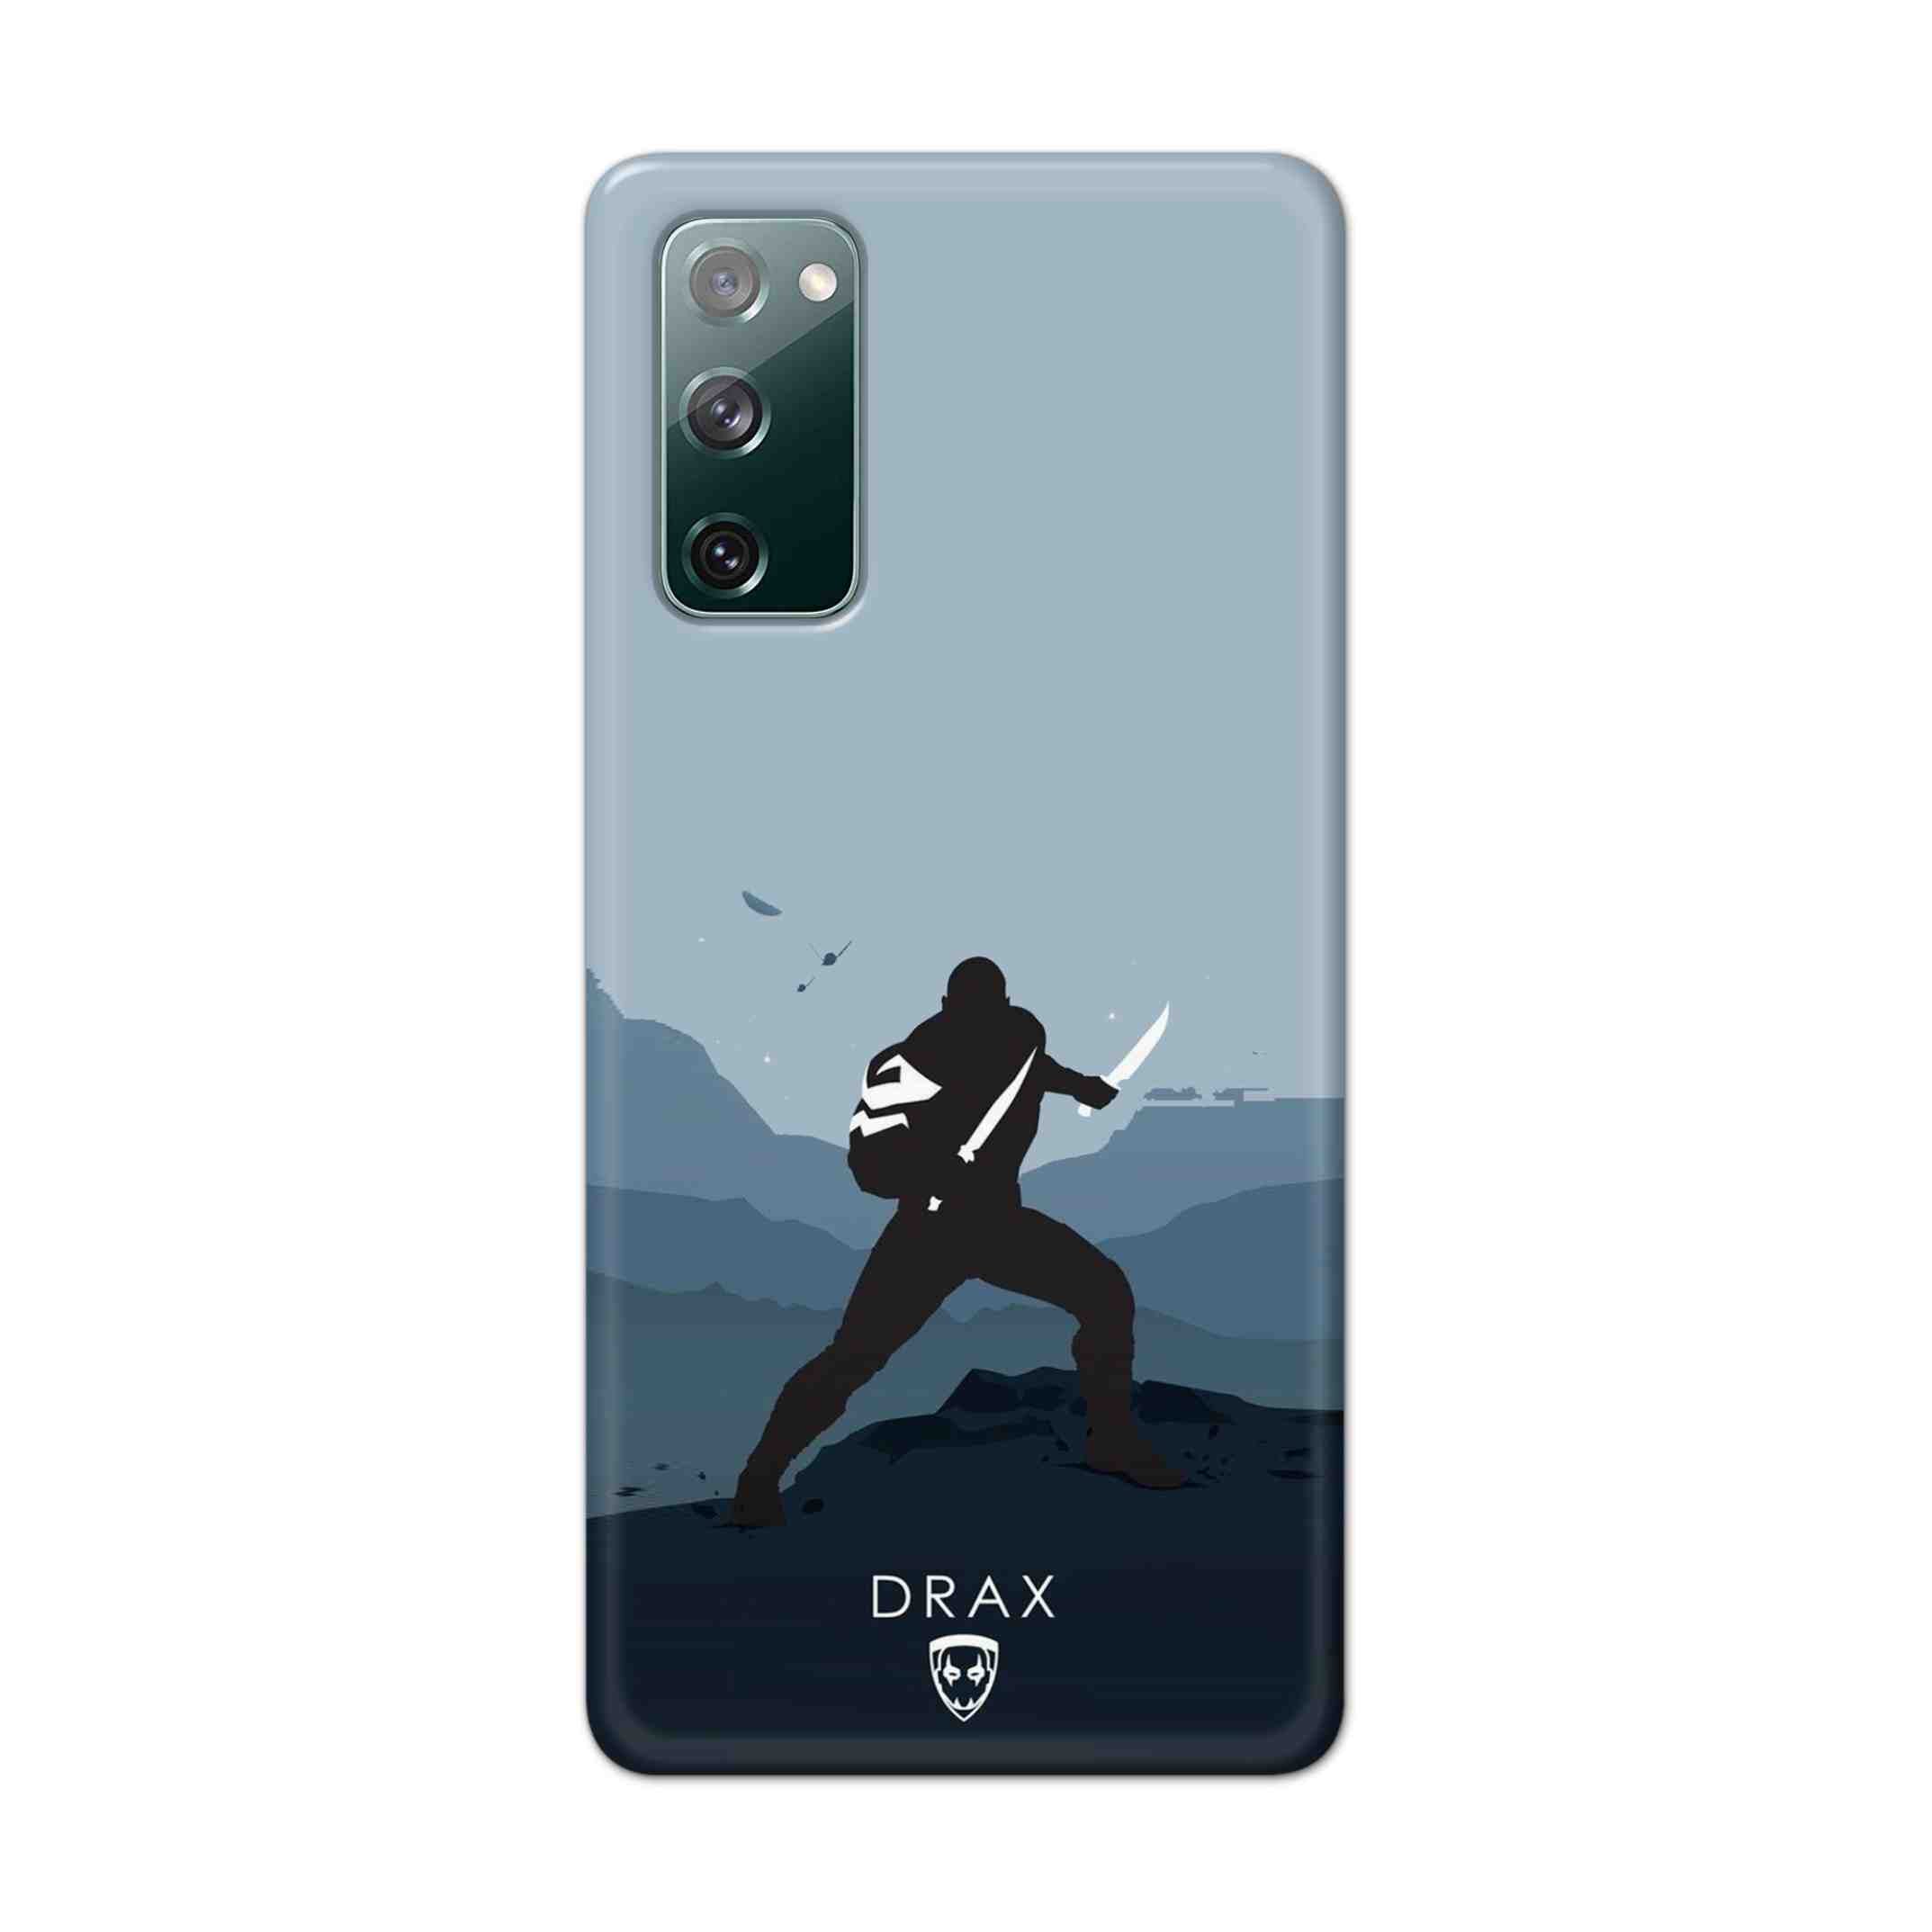 Buy Drax Hard Back Mobile Phone Case Cover For Samsung Galaxy S20 FE Online